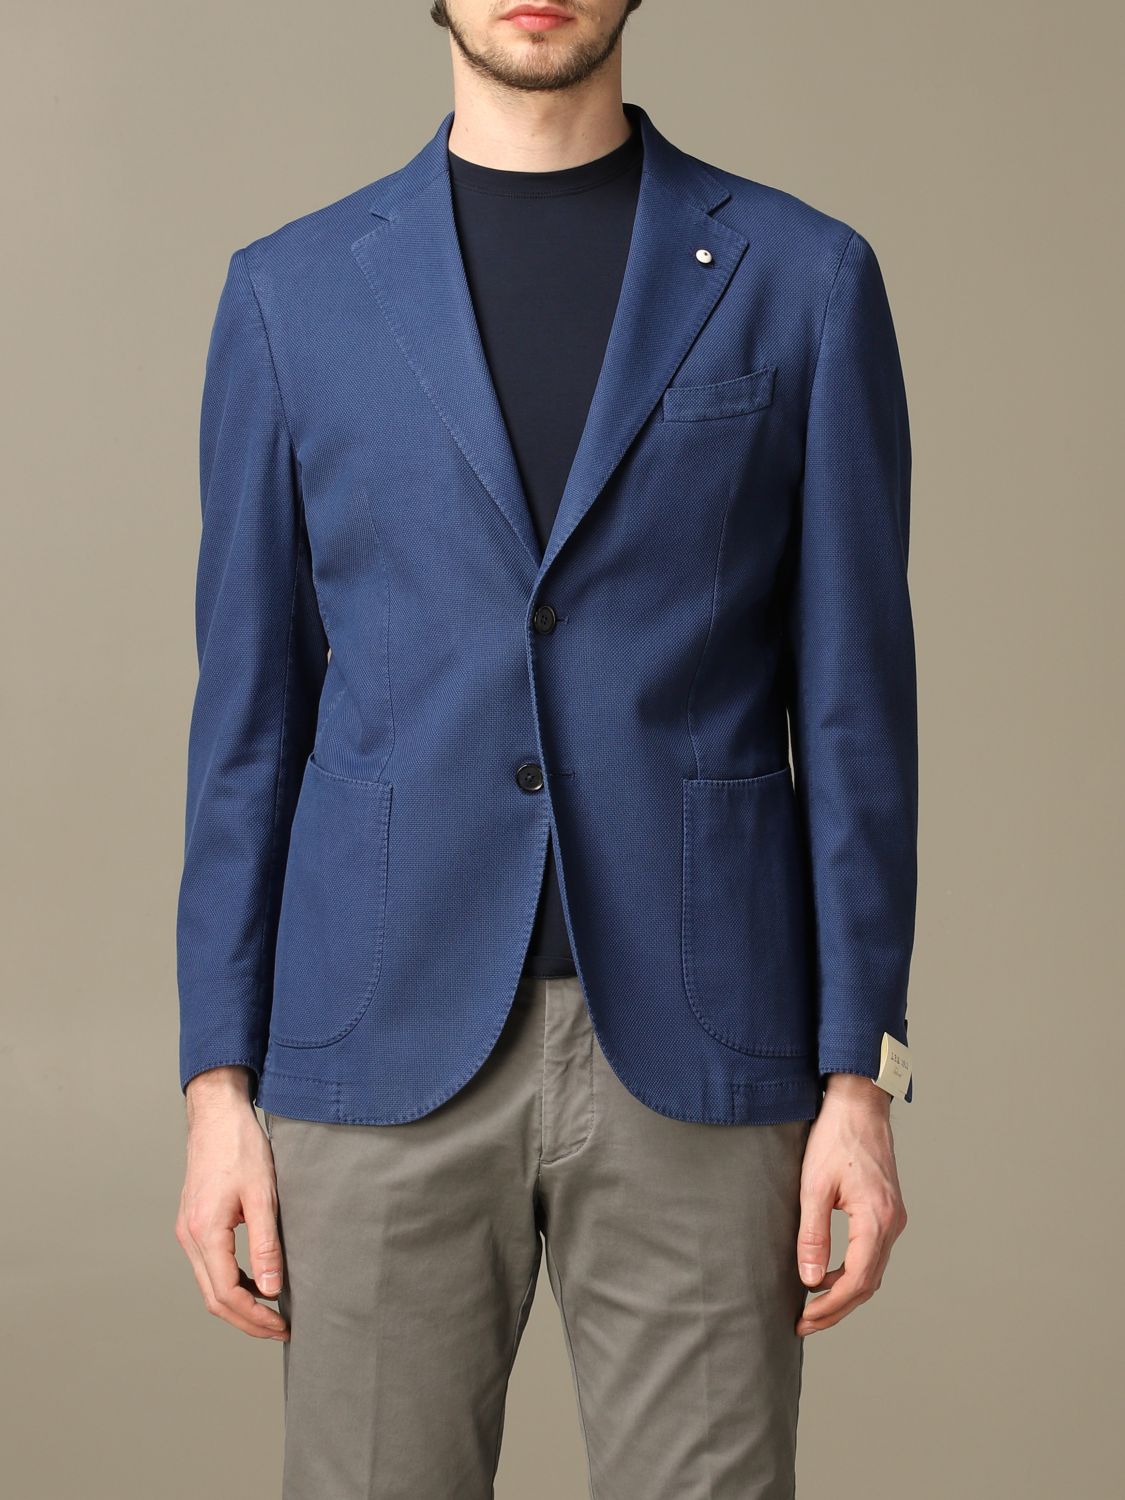 Verbinding Orthodox Oude man L.b.m. 1911 Outlet: Jacket men | Jacket L.b.m. 1911 Men Blue | Jacket L.b.m.  1911 5830 2837 GIGLIO.COM